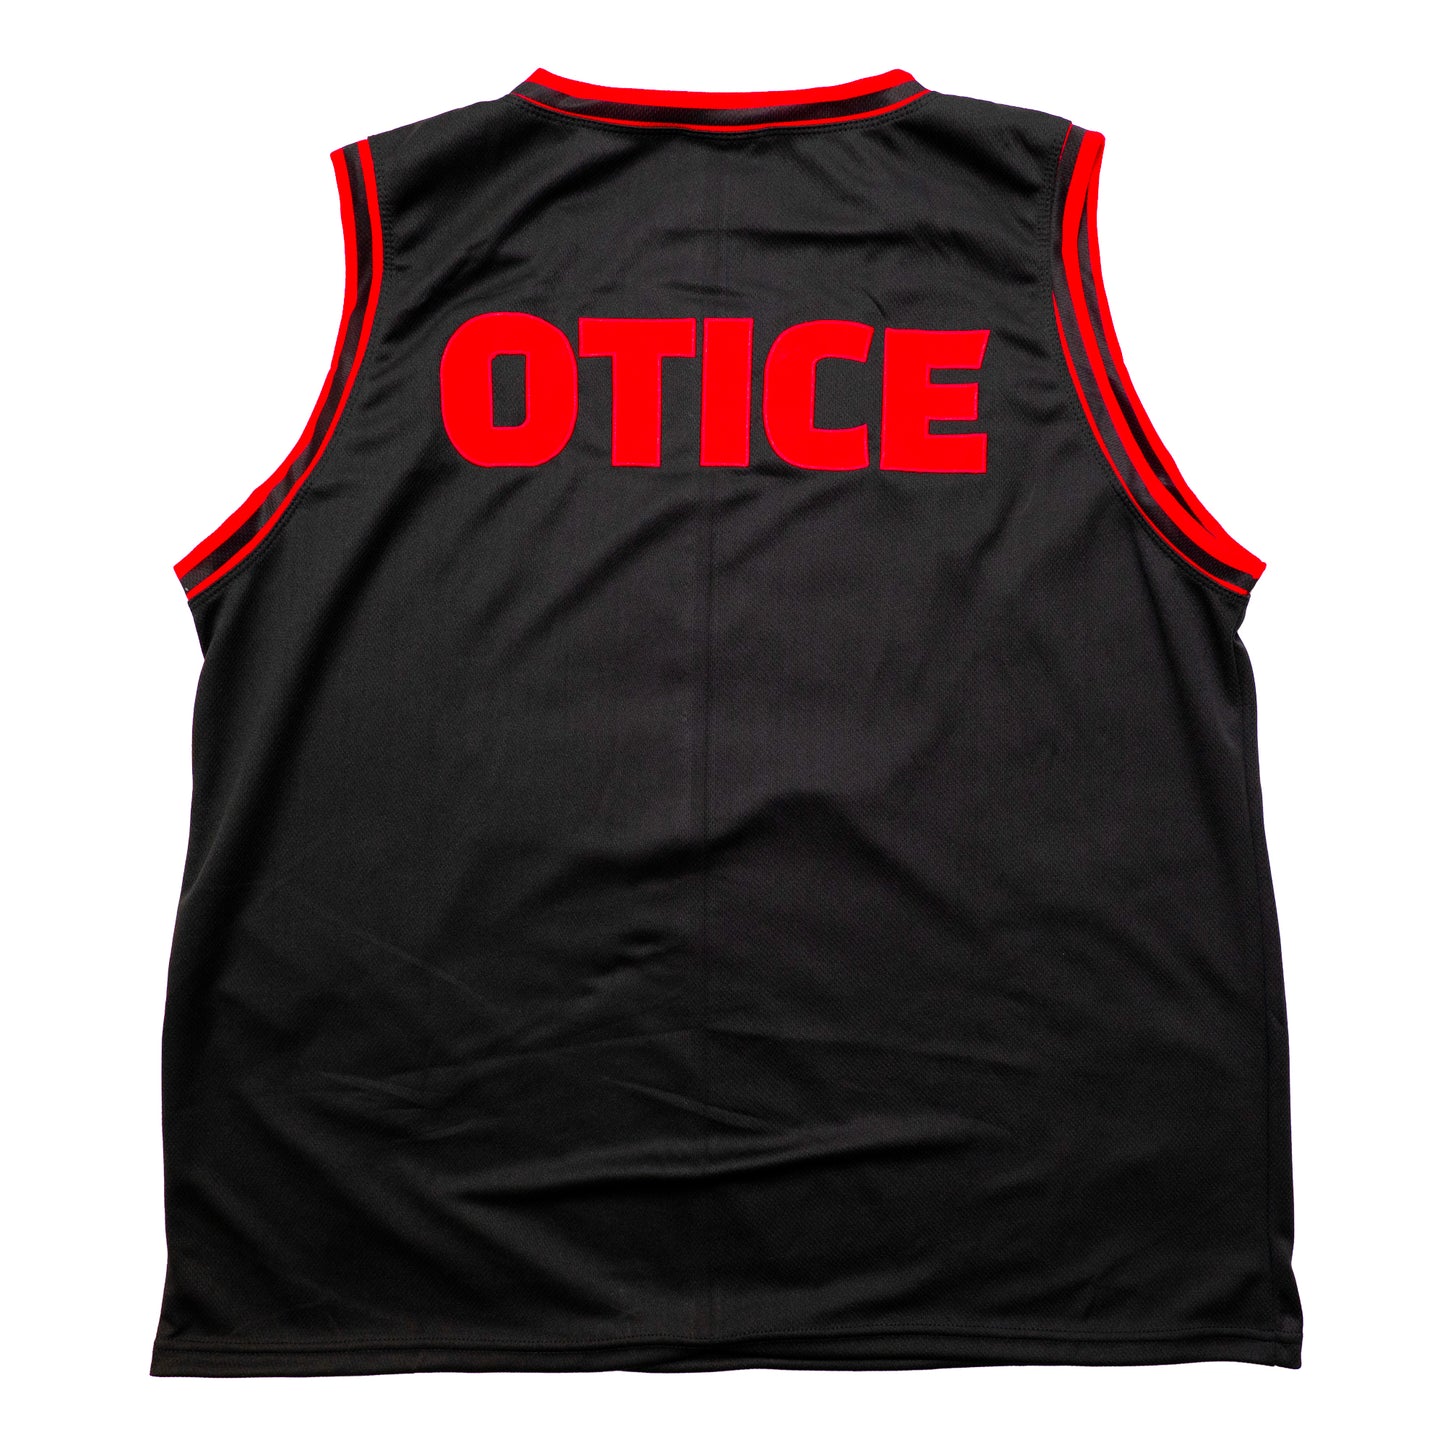 Basketball Jersey - Faces - Otice